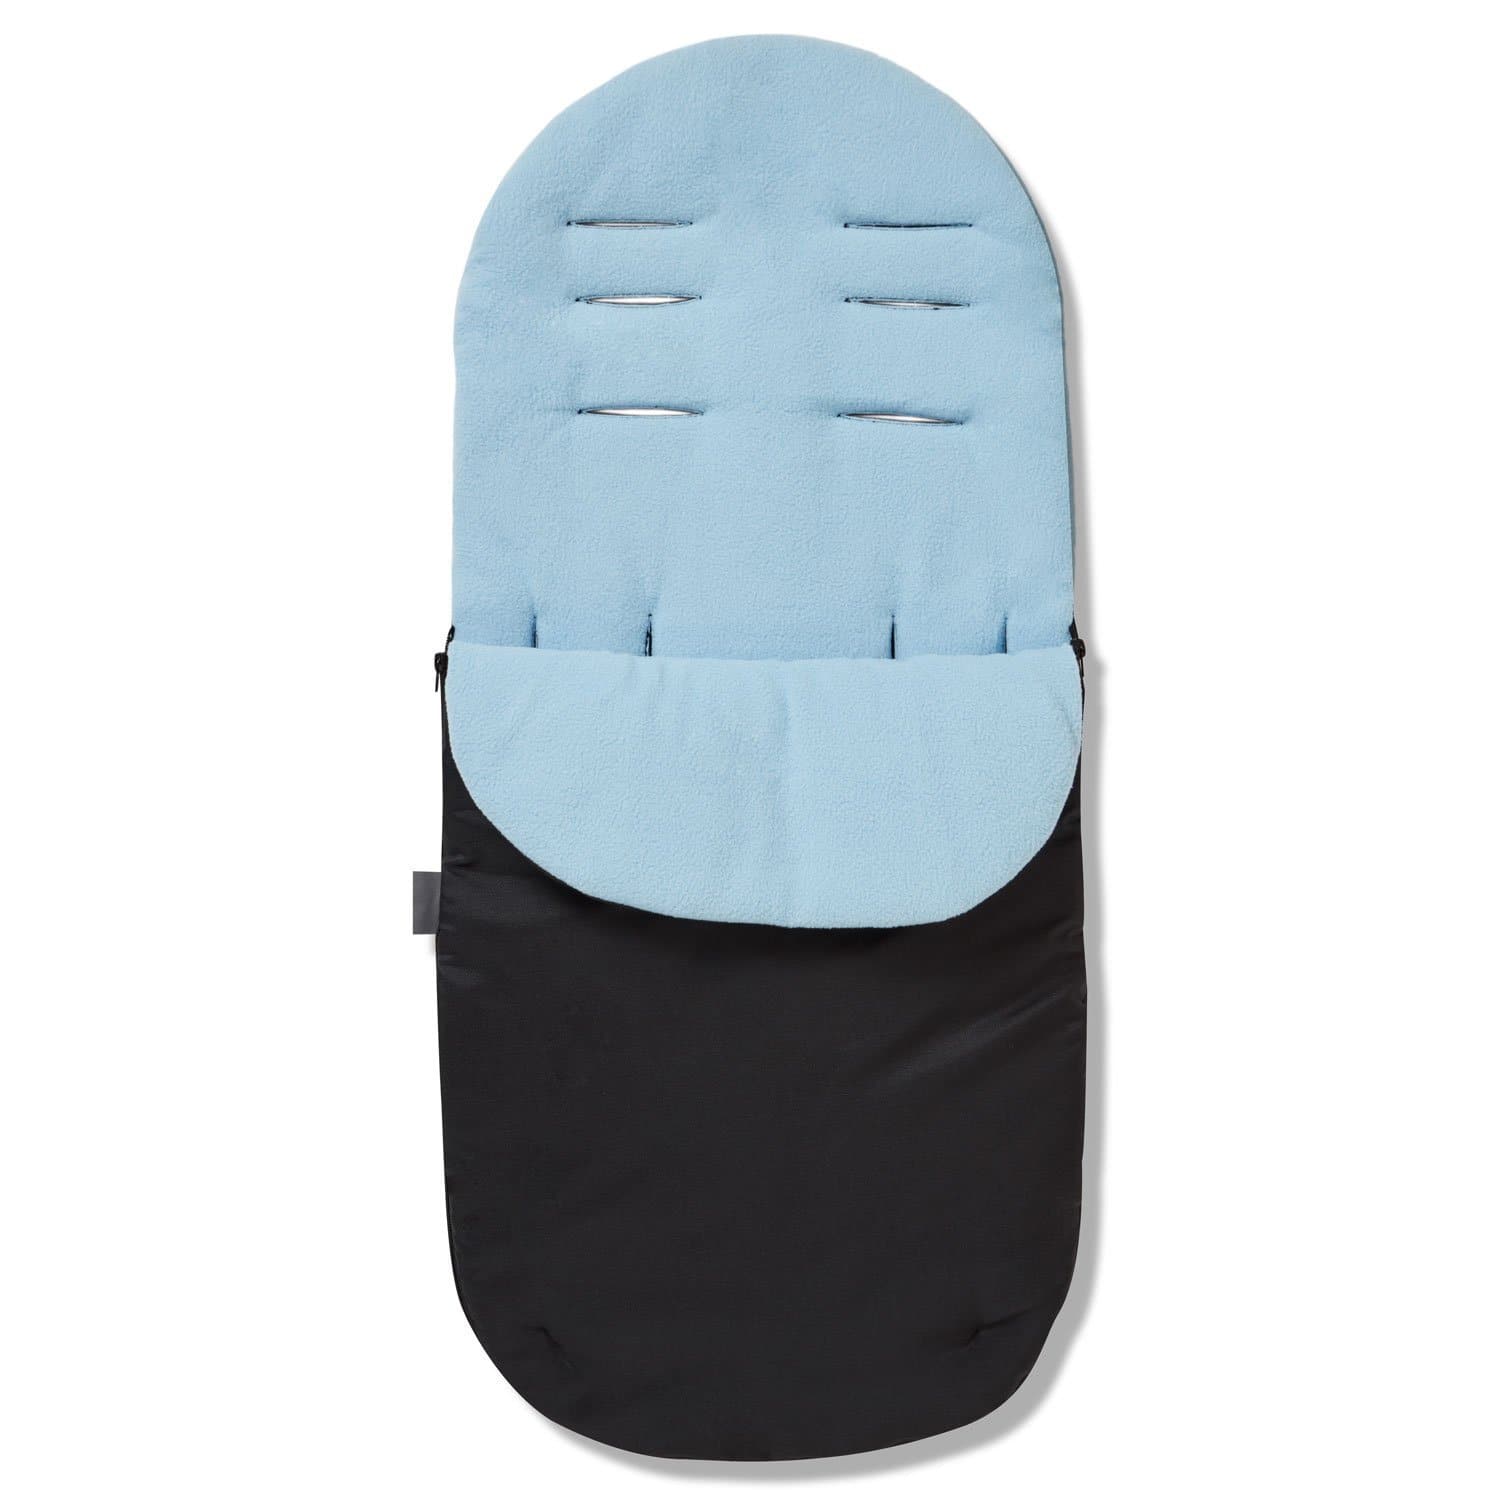 Footmuff / Cosy Toes Compatible with Hauck - Light Blue / Fits All Models | For Your Little One